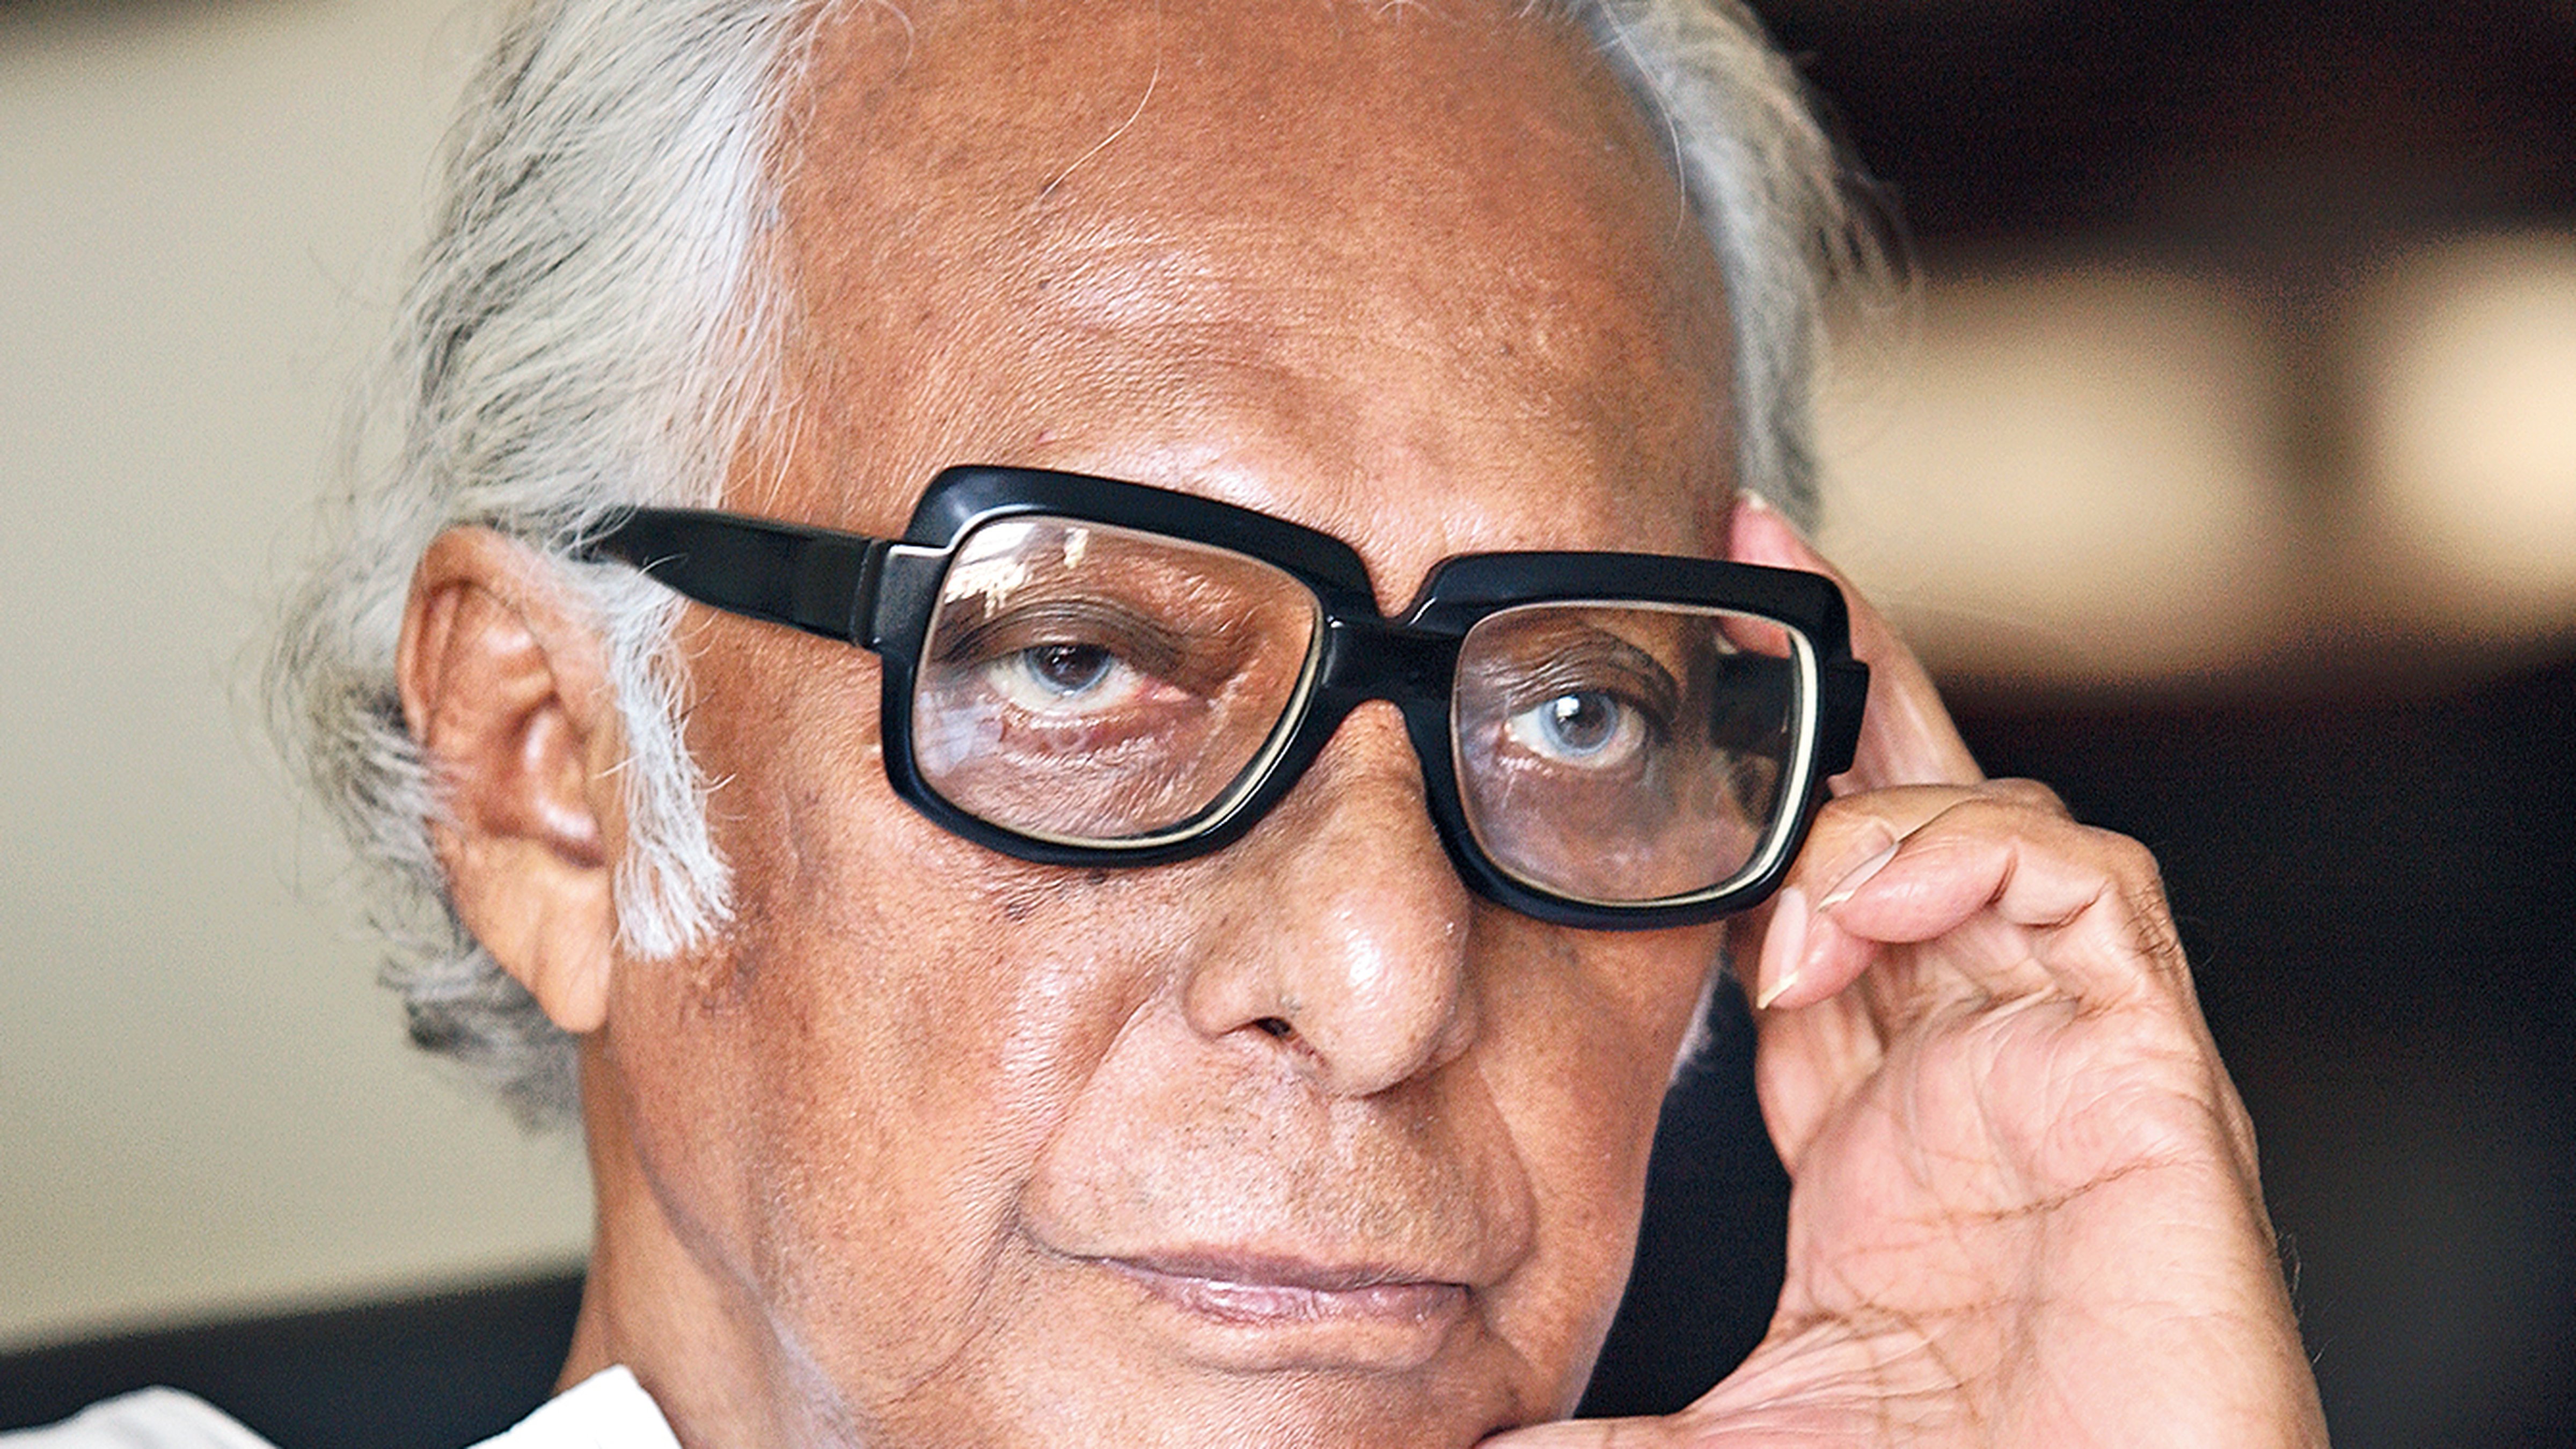 Mrinal Sen’s words provided food for thought to the restless young souls of the time when both the city and the countryside were plunged in the turmoil of internal contradictions and external fears generated by growing State repression.